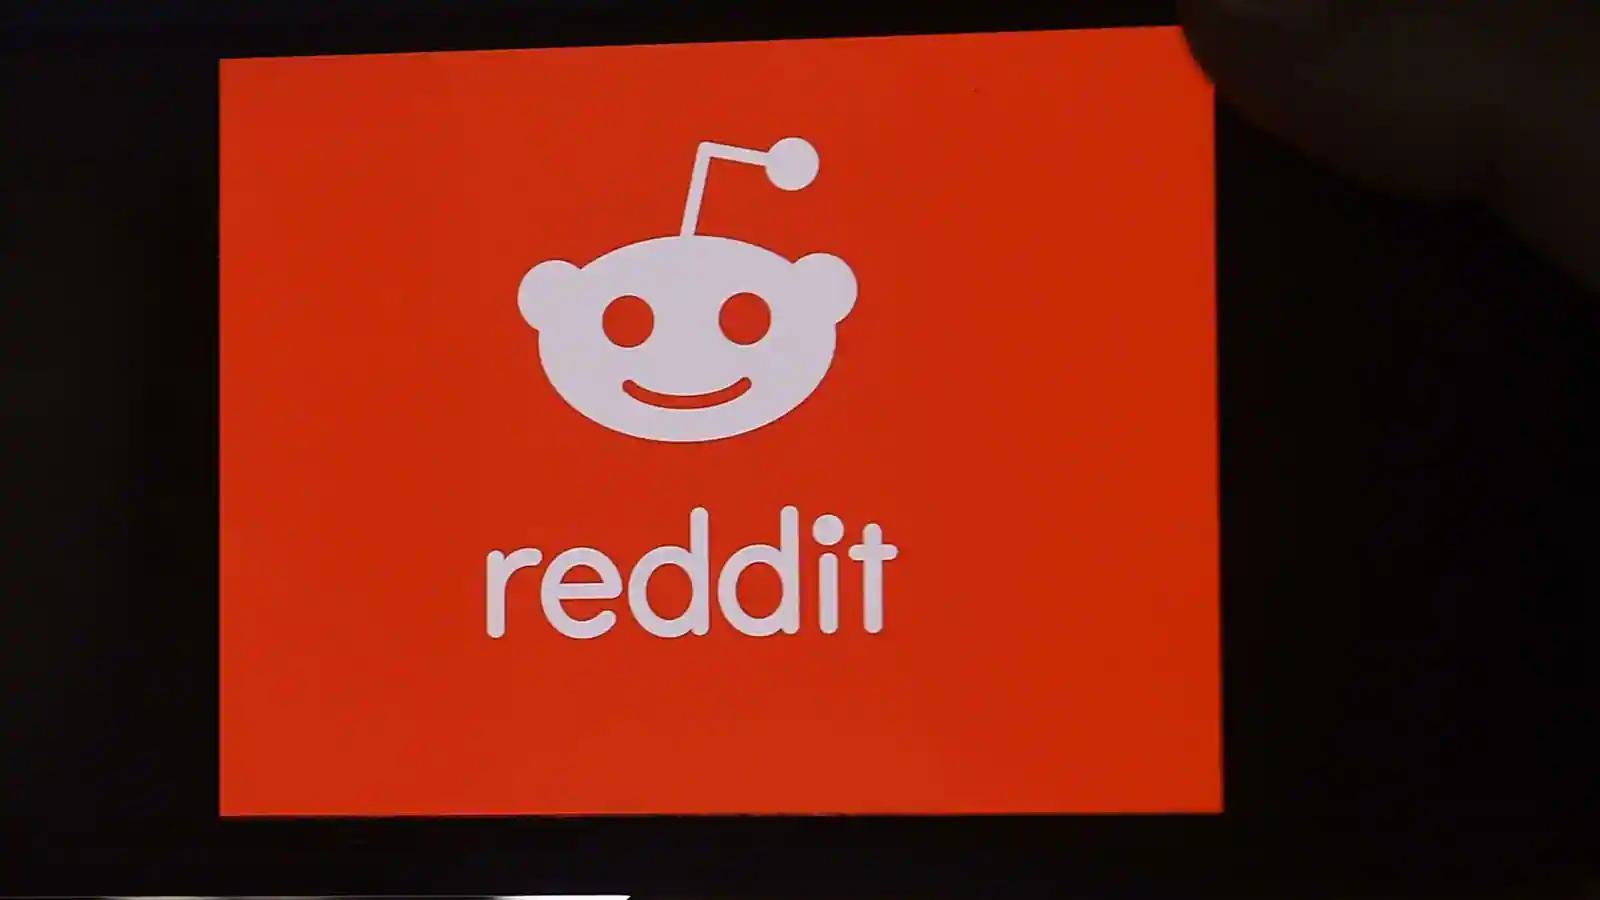 Reddit documents confidentially opens to people